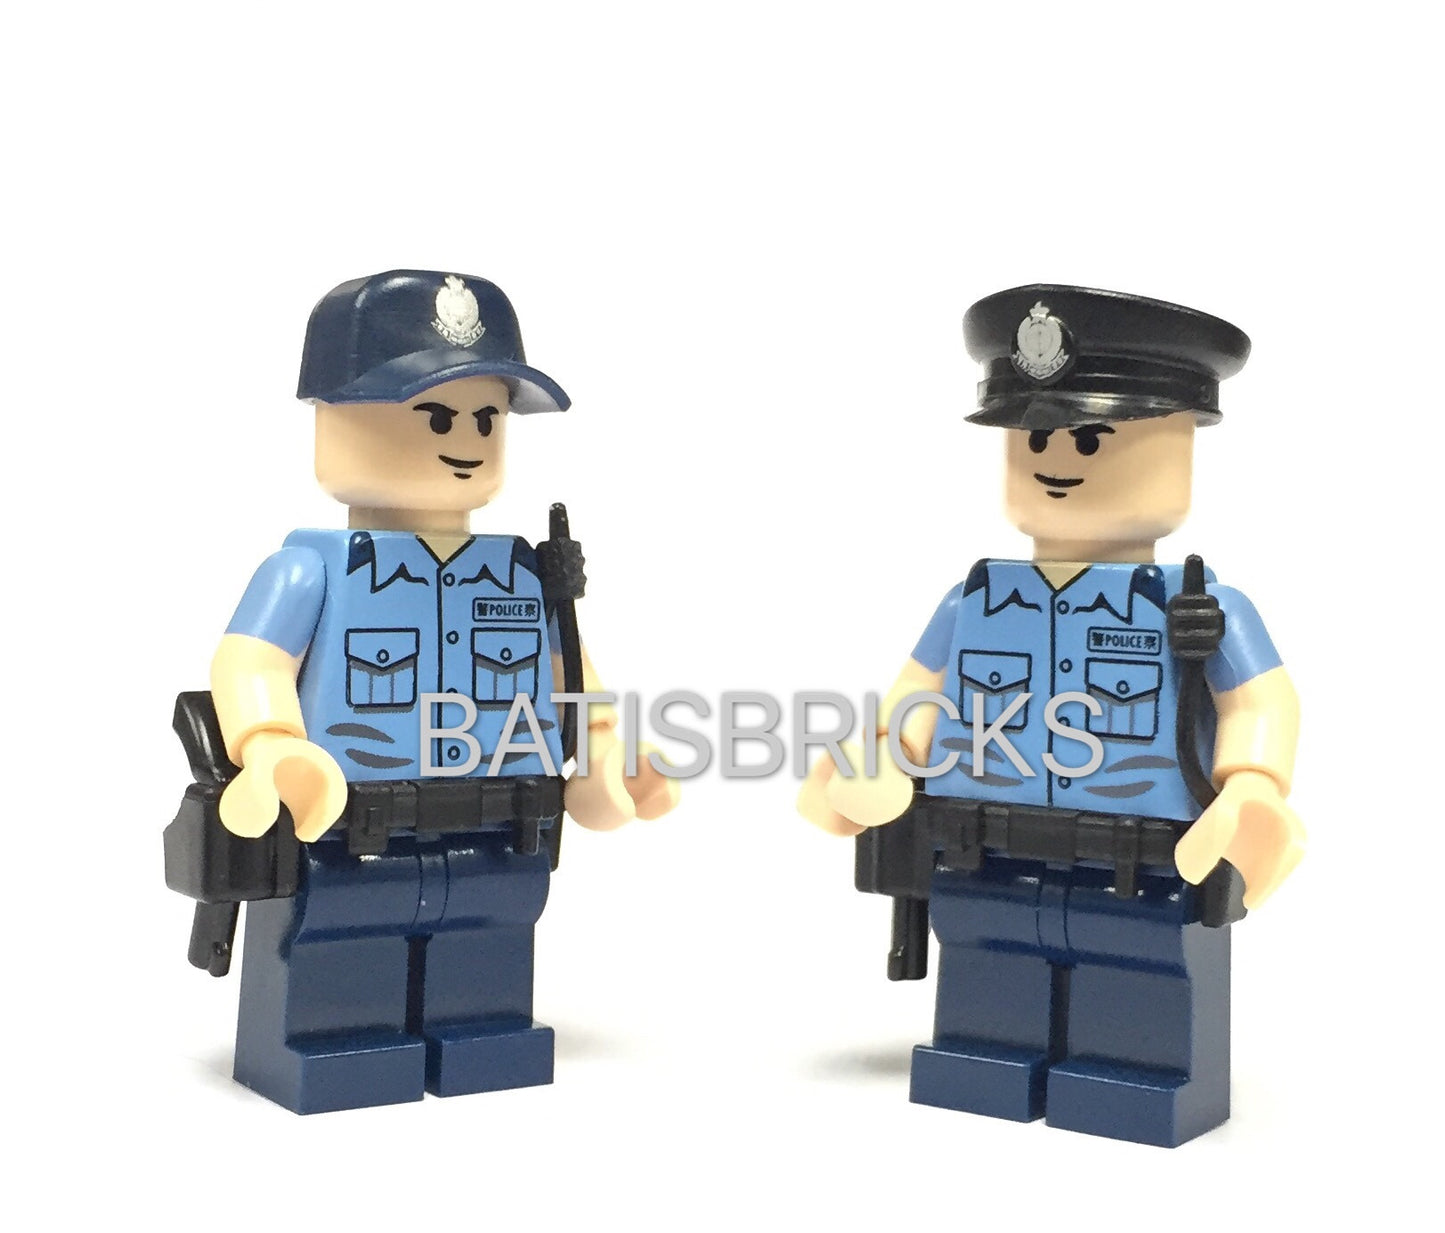 Police cap with printed